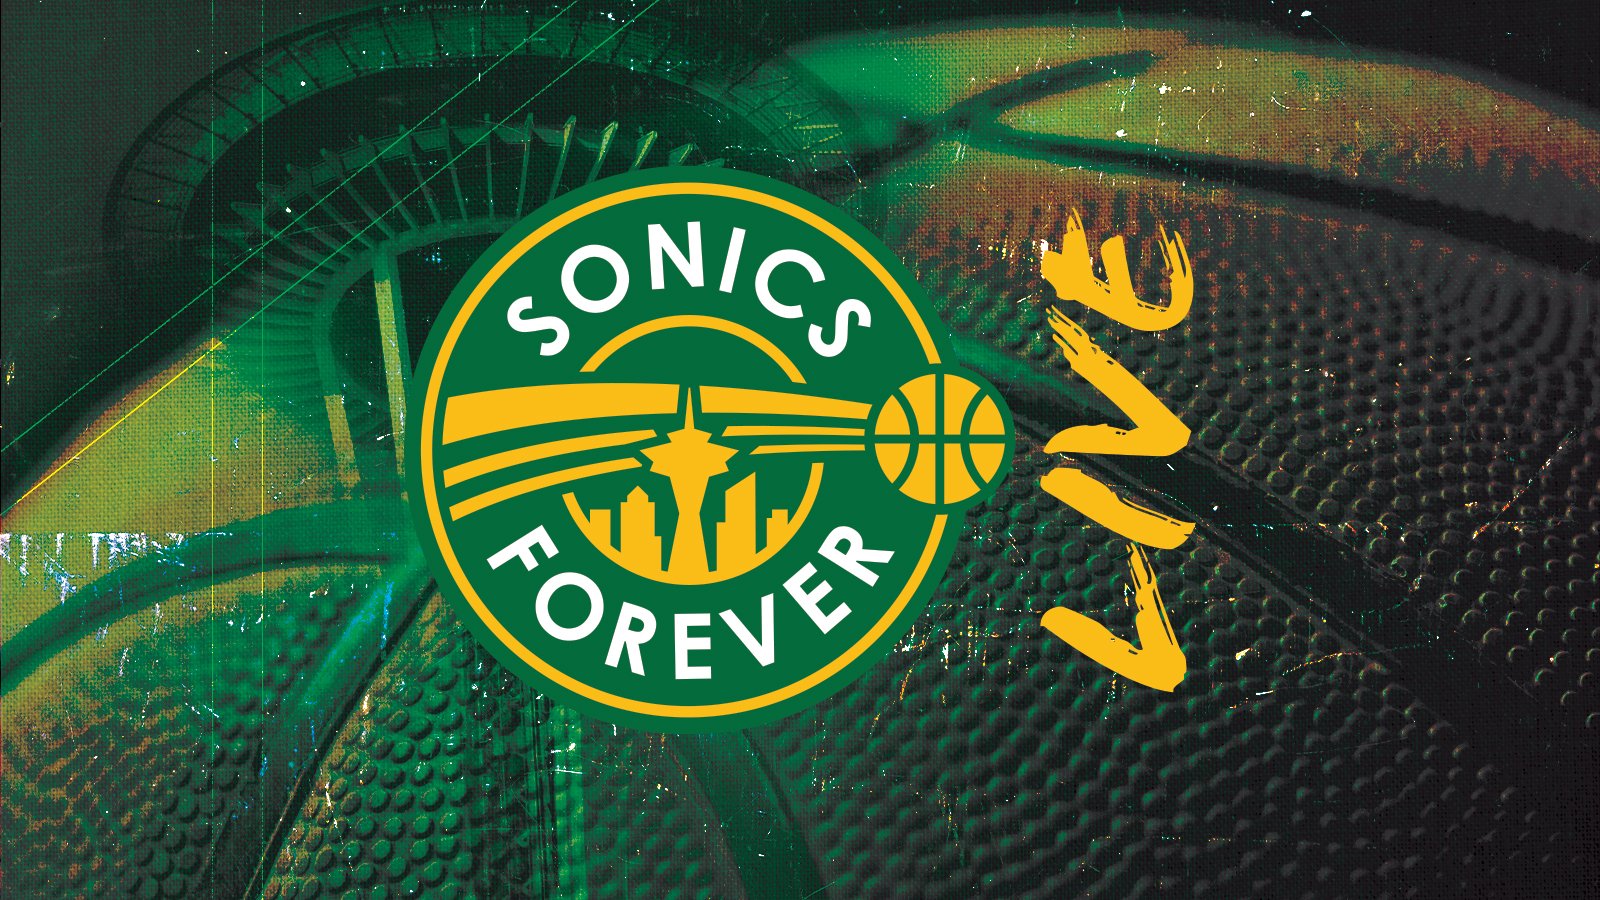 Sonics Forever Live - Shawn Kemp and Gary Payton 